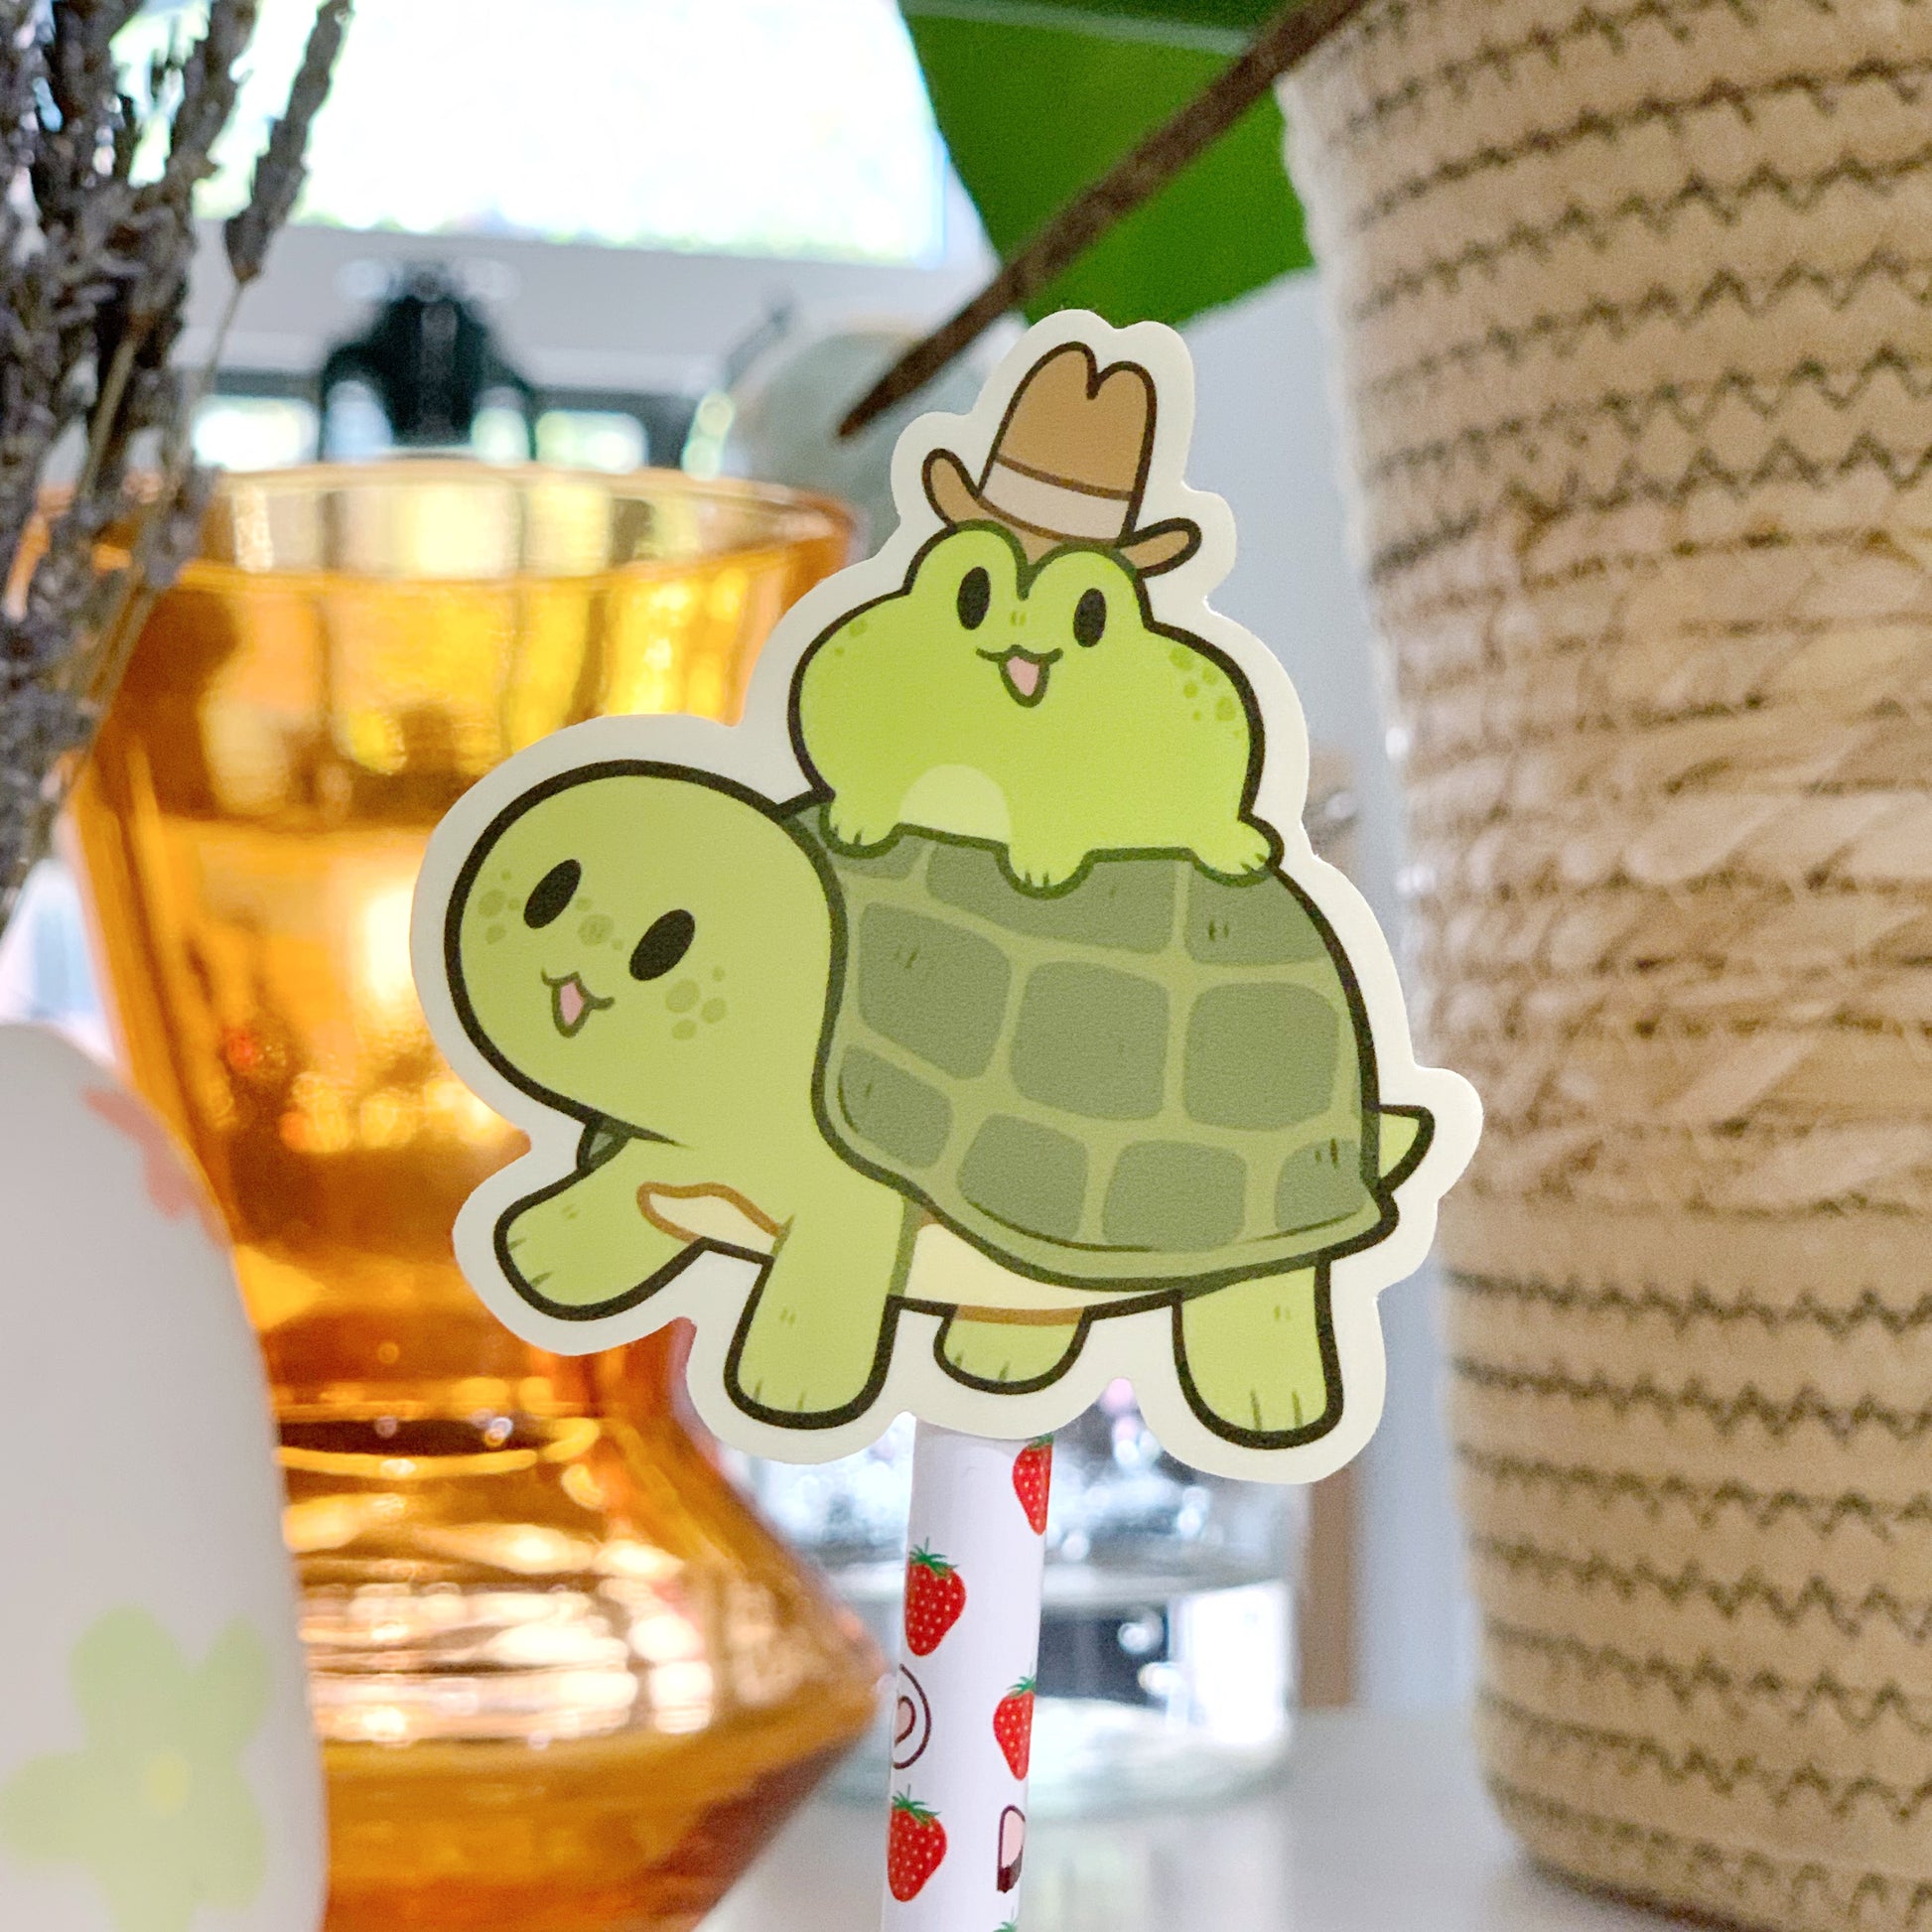 Vinyl sticker of an illustrated green frog with an open mouth smile wearing a tall brow cowboy hat, riding a green turtle with an open smile. Photographed in front of an orange transparent vase, and a large wicker basket.